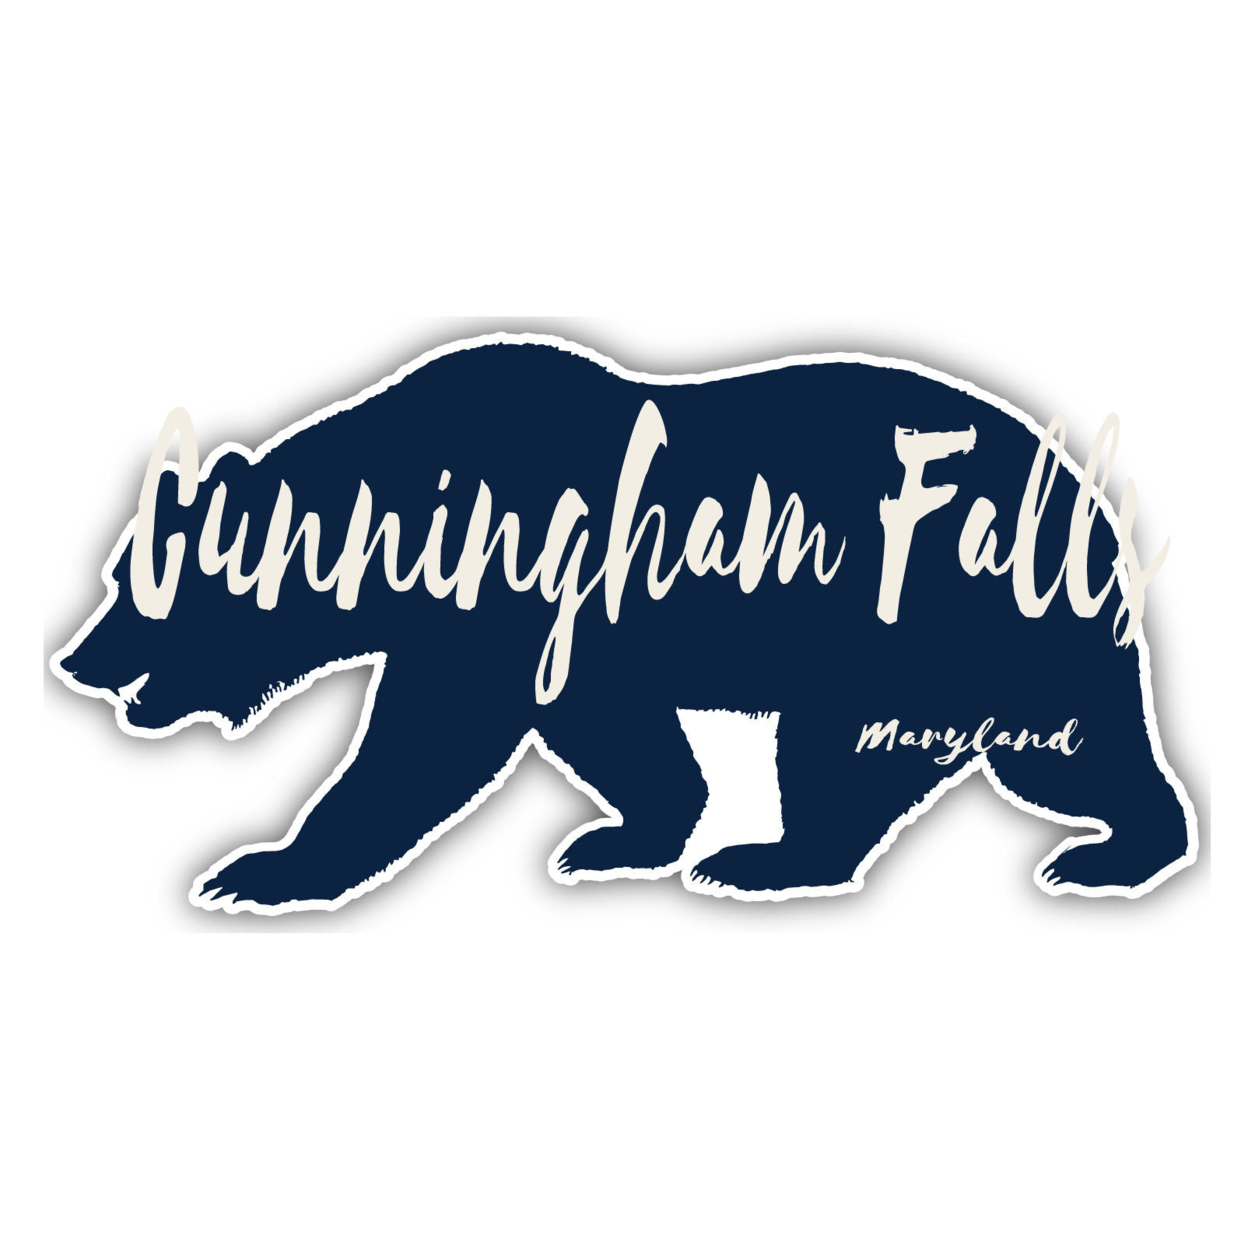 Cunningham Falls Maryland Souvenir Decorative Stickers (Choose Theme And Size) - 4-Pack, 6-Inch, Bear